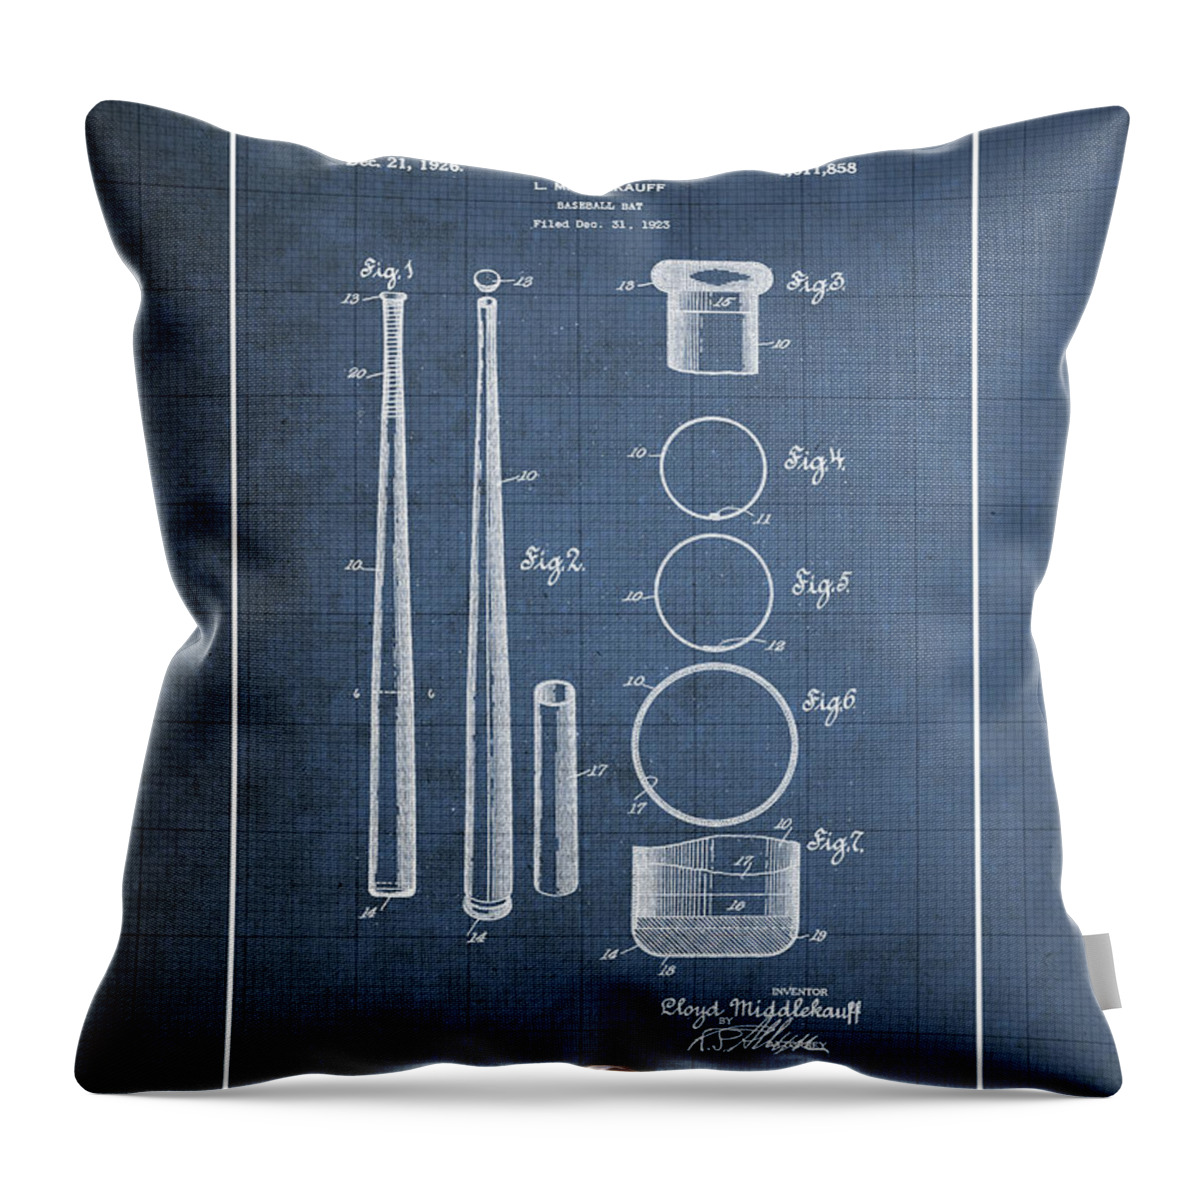 C7 Sports Patents And Blueprints Throw Pillow featuring the digital art Baseball bat by Lloyd Middlekauff - Vintage Patent Blueprint by Serge Averbukh